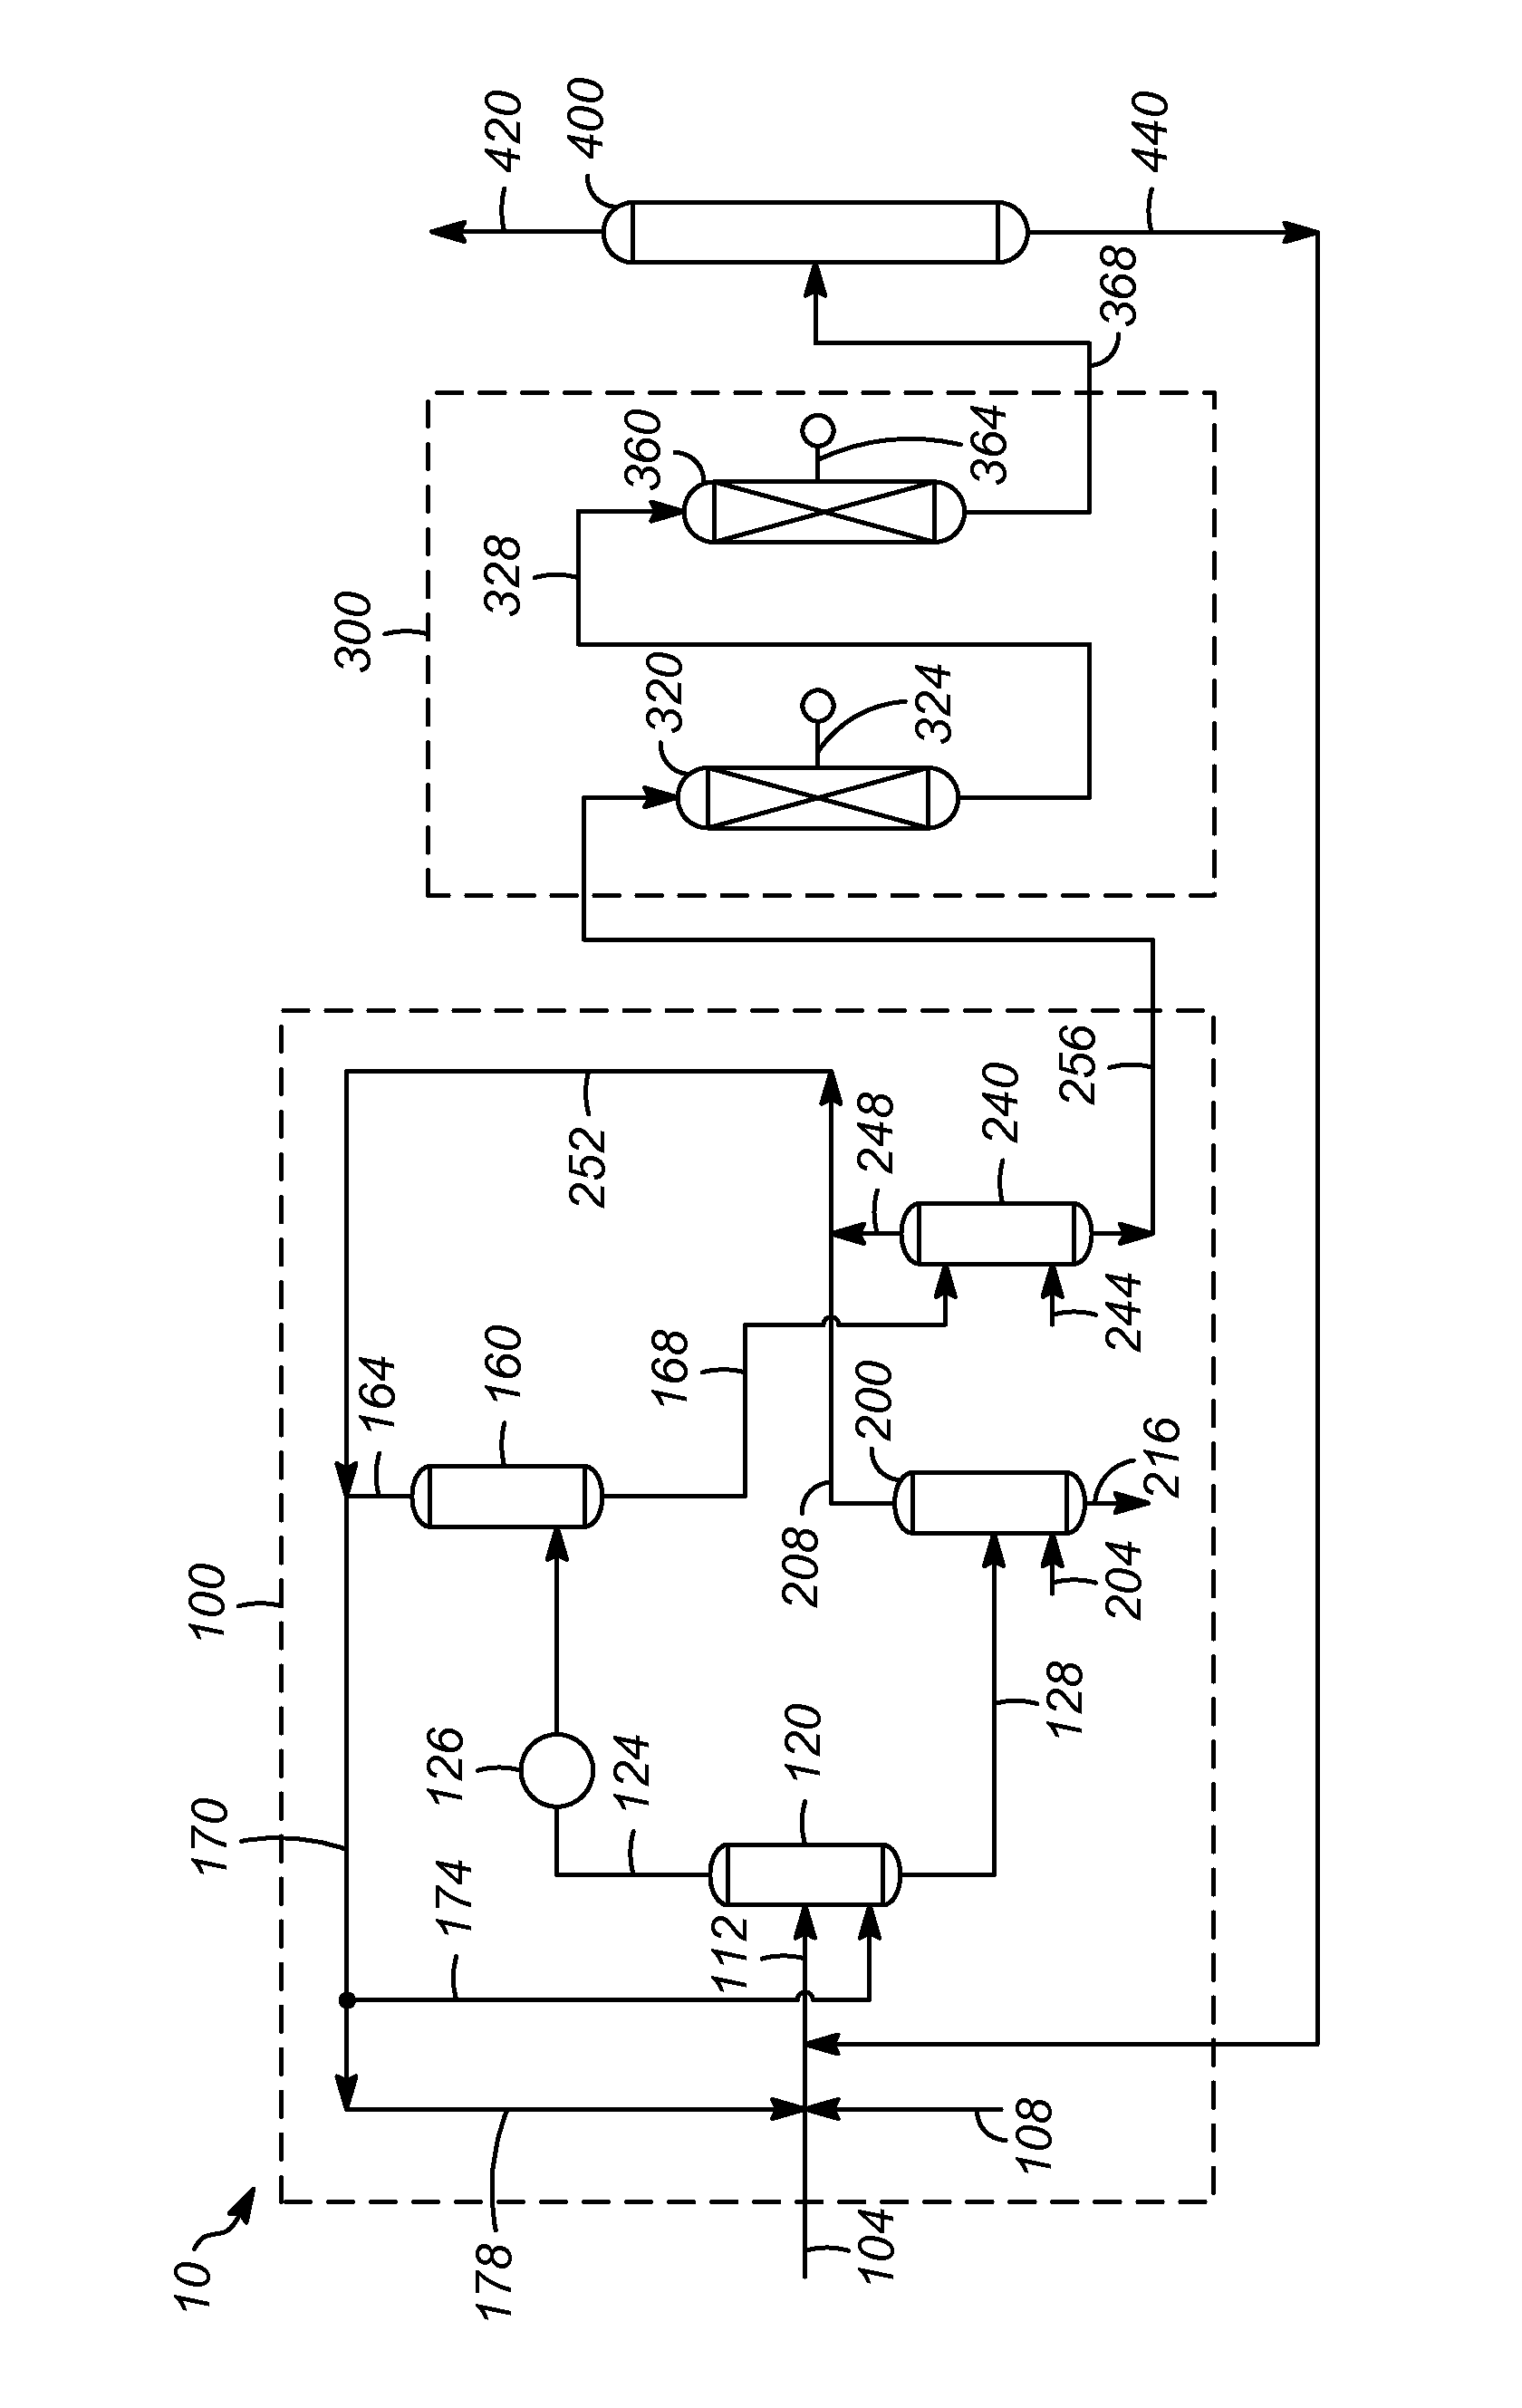 Process for controlling operations of a residue process unit